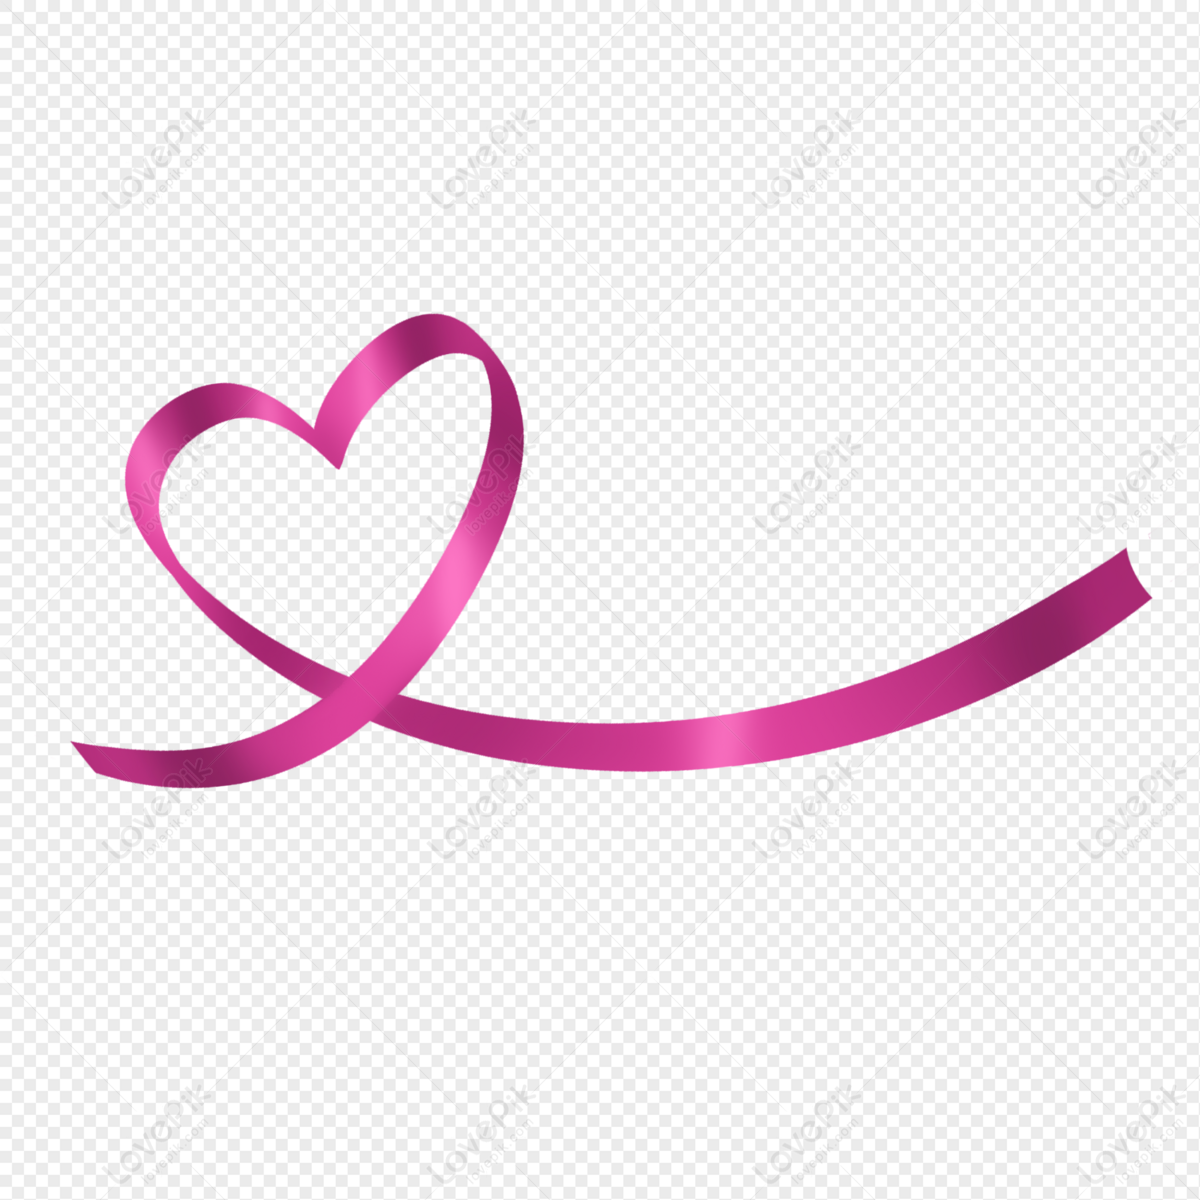 Pink heart ribbon with bows tied to stick png download - 1084*1500 - Free  Transparent Pink Heart png Download. - CleanPNG / KissPNG